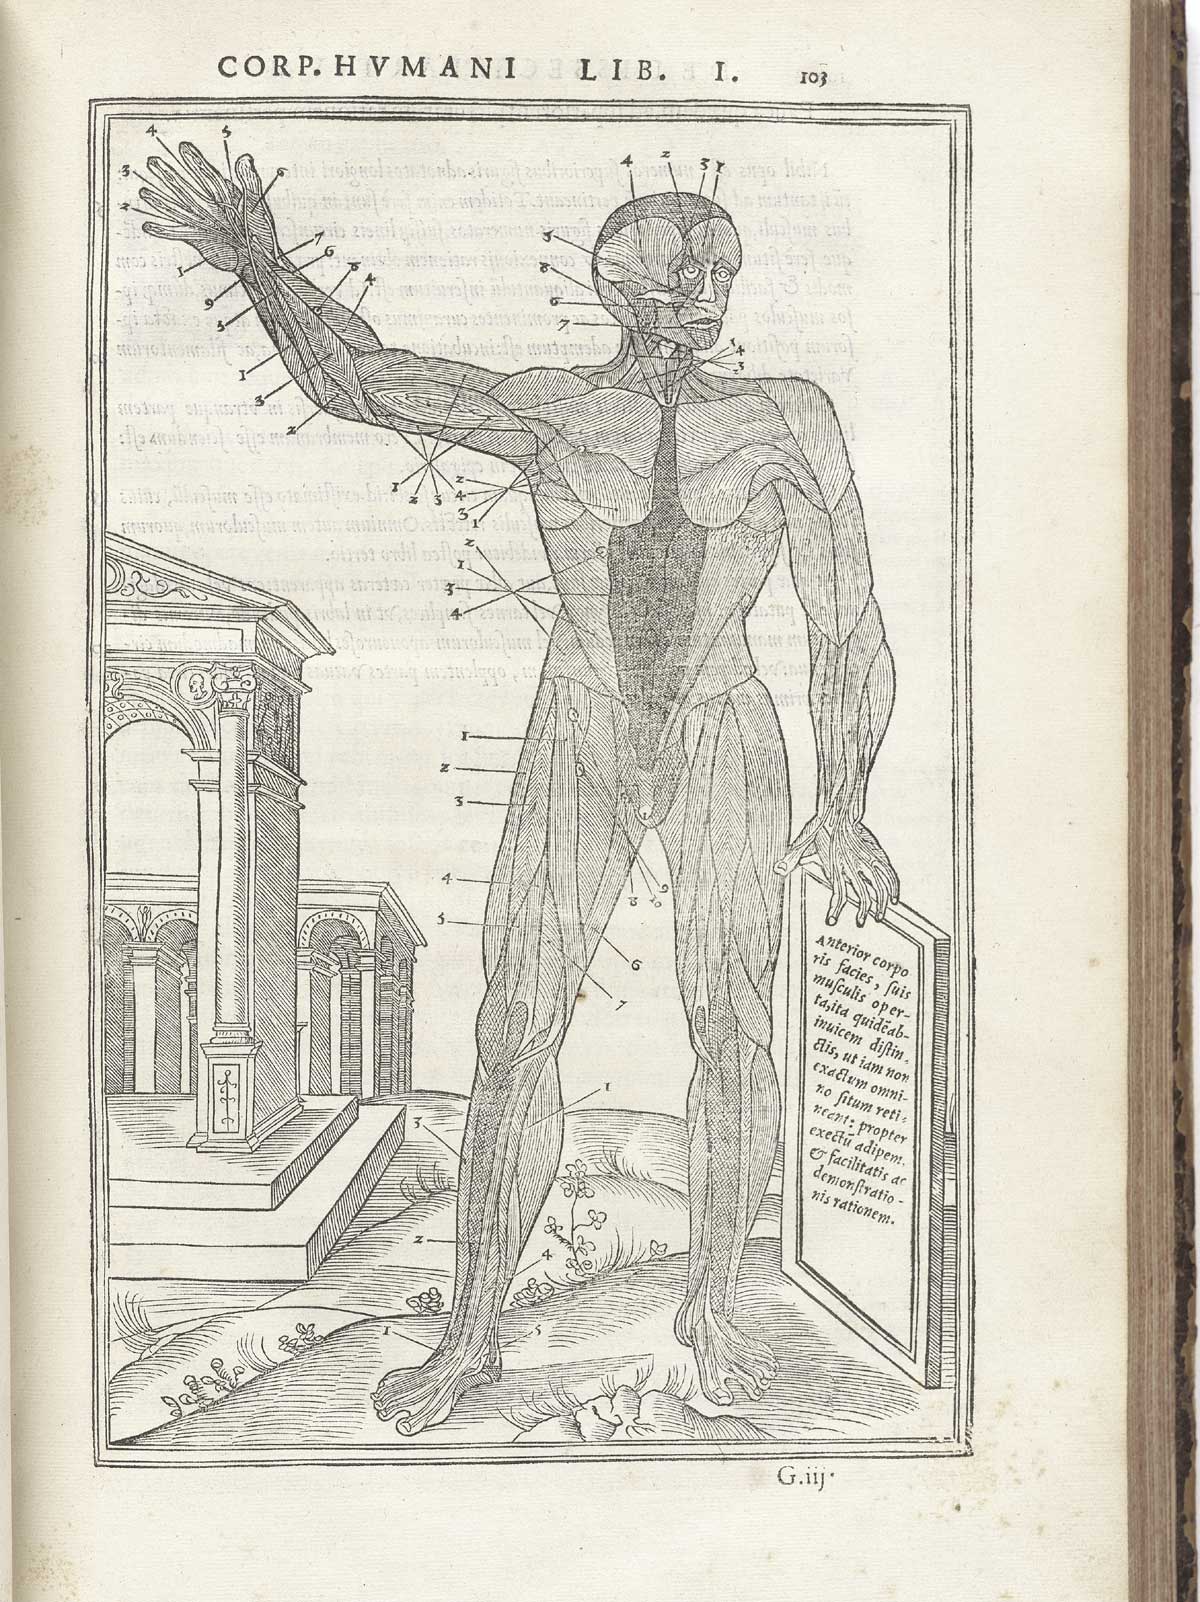 Woodcut muscle figure standing in a classical pastoral setting with a large ruined temple on the left, facing the viewer with his right arm raised and left hand holding a placard with text in Latin describing the exterior layer of muscles which are exposed, with index letters surrounding him pointing to numerous structures, from Charles Estienne’s De dissection partium corporis humani libri tres, NLM Call no.: WZ 240 E81dd 1545.